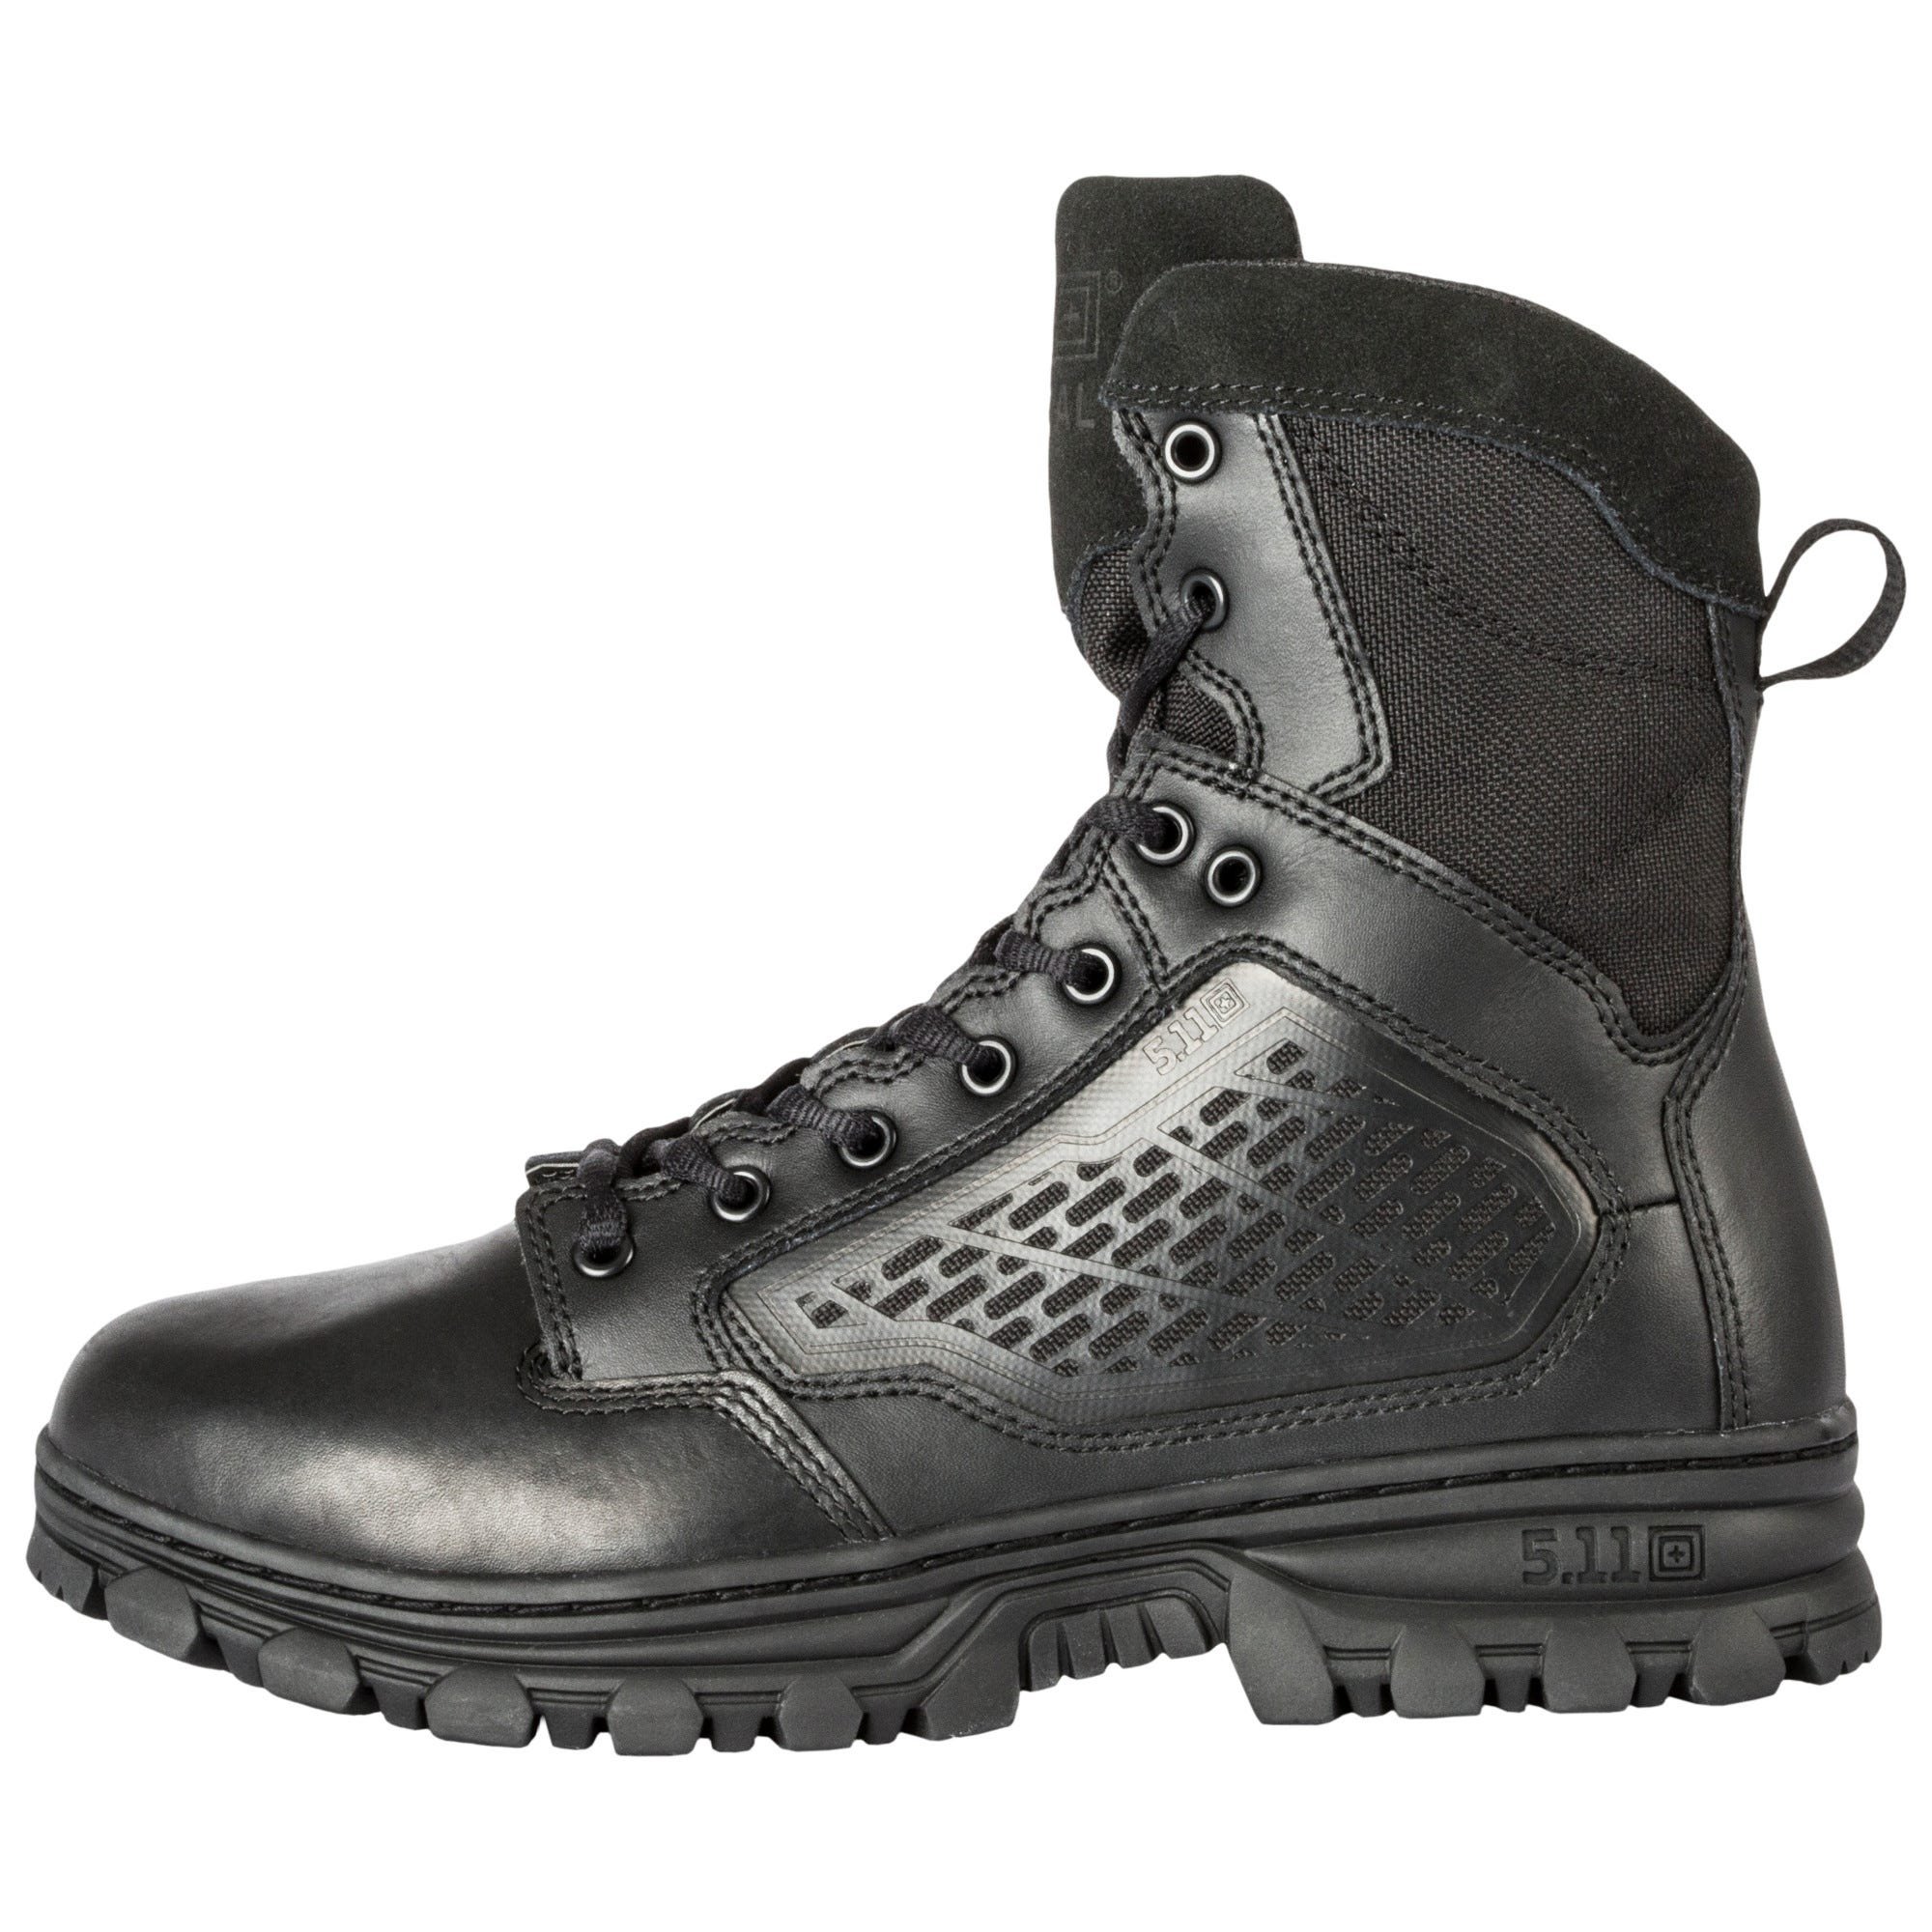 5.11 Work Gear Men's EVO 6-inch Boots, Side Zip, Full Grain Leather, Ortholite Insole, Black, 9/Regular, Style 12311 - image 3 of 6